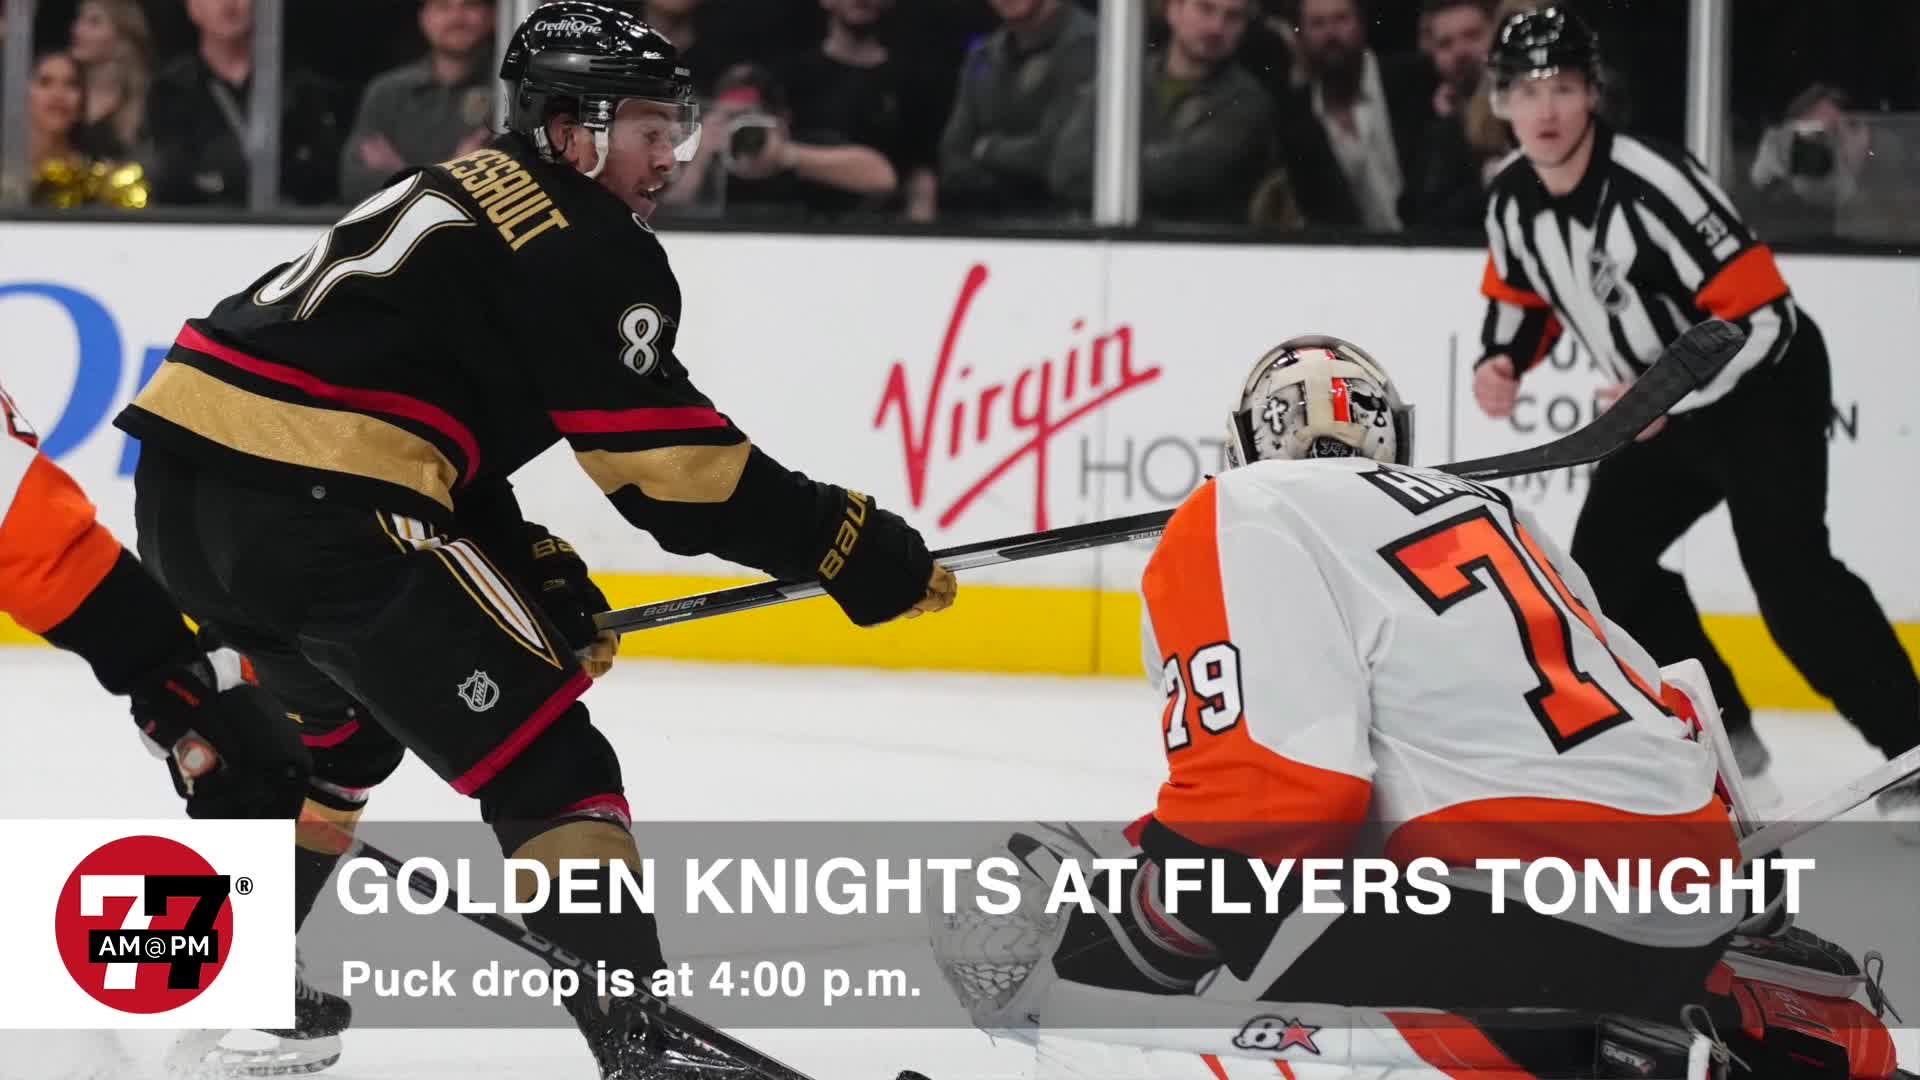 Golden Knights play Flyers